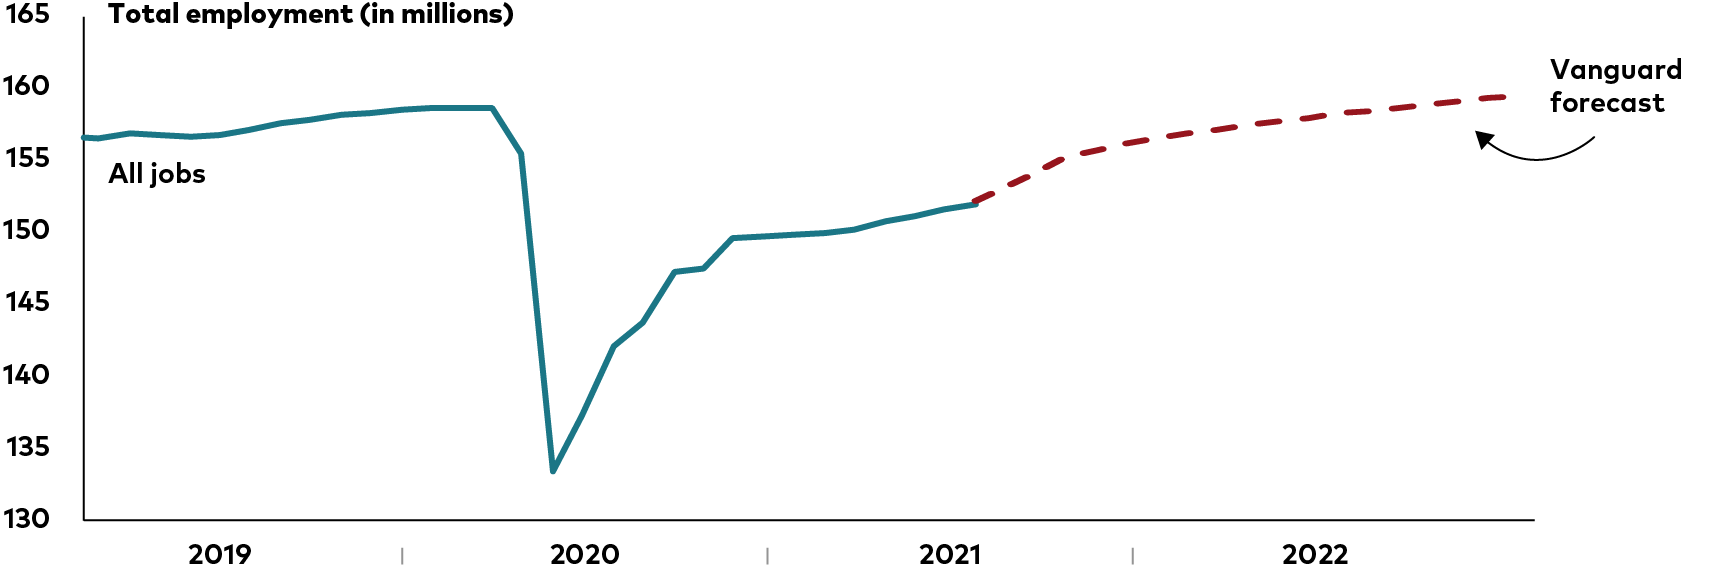 The illustration shows a solid line representing actual total U.S. employment through June 2021 and a dotted line with Vanguard’s employment forecast through October 2021. The actual employment figure stands at about 157 million workers in January 2019, rises slightly to about 159 million by February 2020, falls sharply to about 133 million in April 2020, then back upward, sharply at first then gradually, to about 152 million by June 2021. The dotted line then shows Vanguard’s employment forecast reaching about 153 million workers in July 2021 and rising to 160 million by the end of 2022. The forecast includes a noticeable acceleration from August 2021 through October 2021 in the number of workers employed.